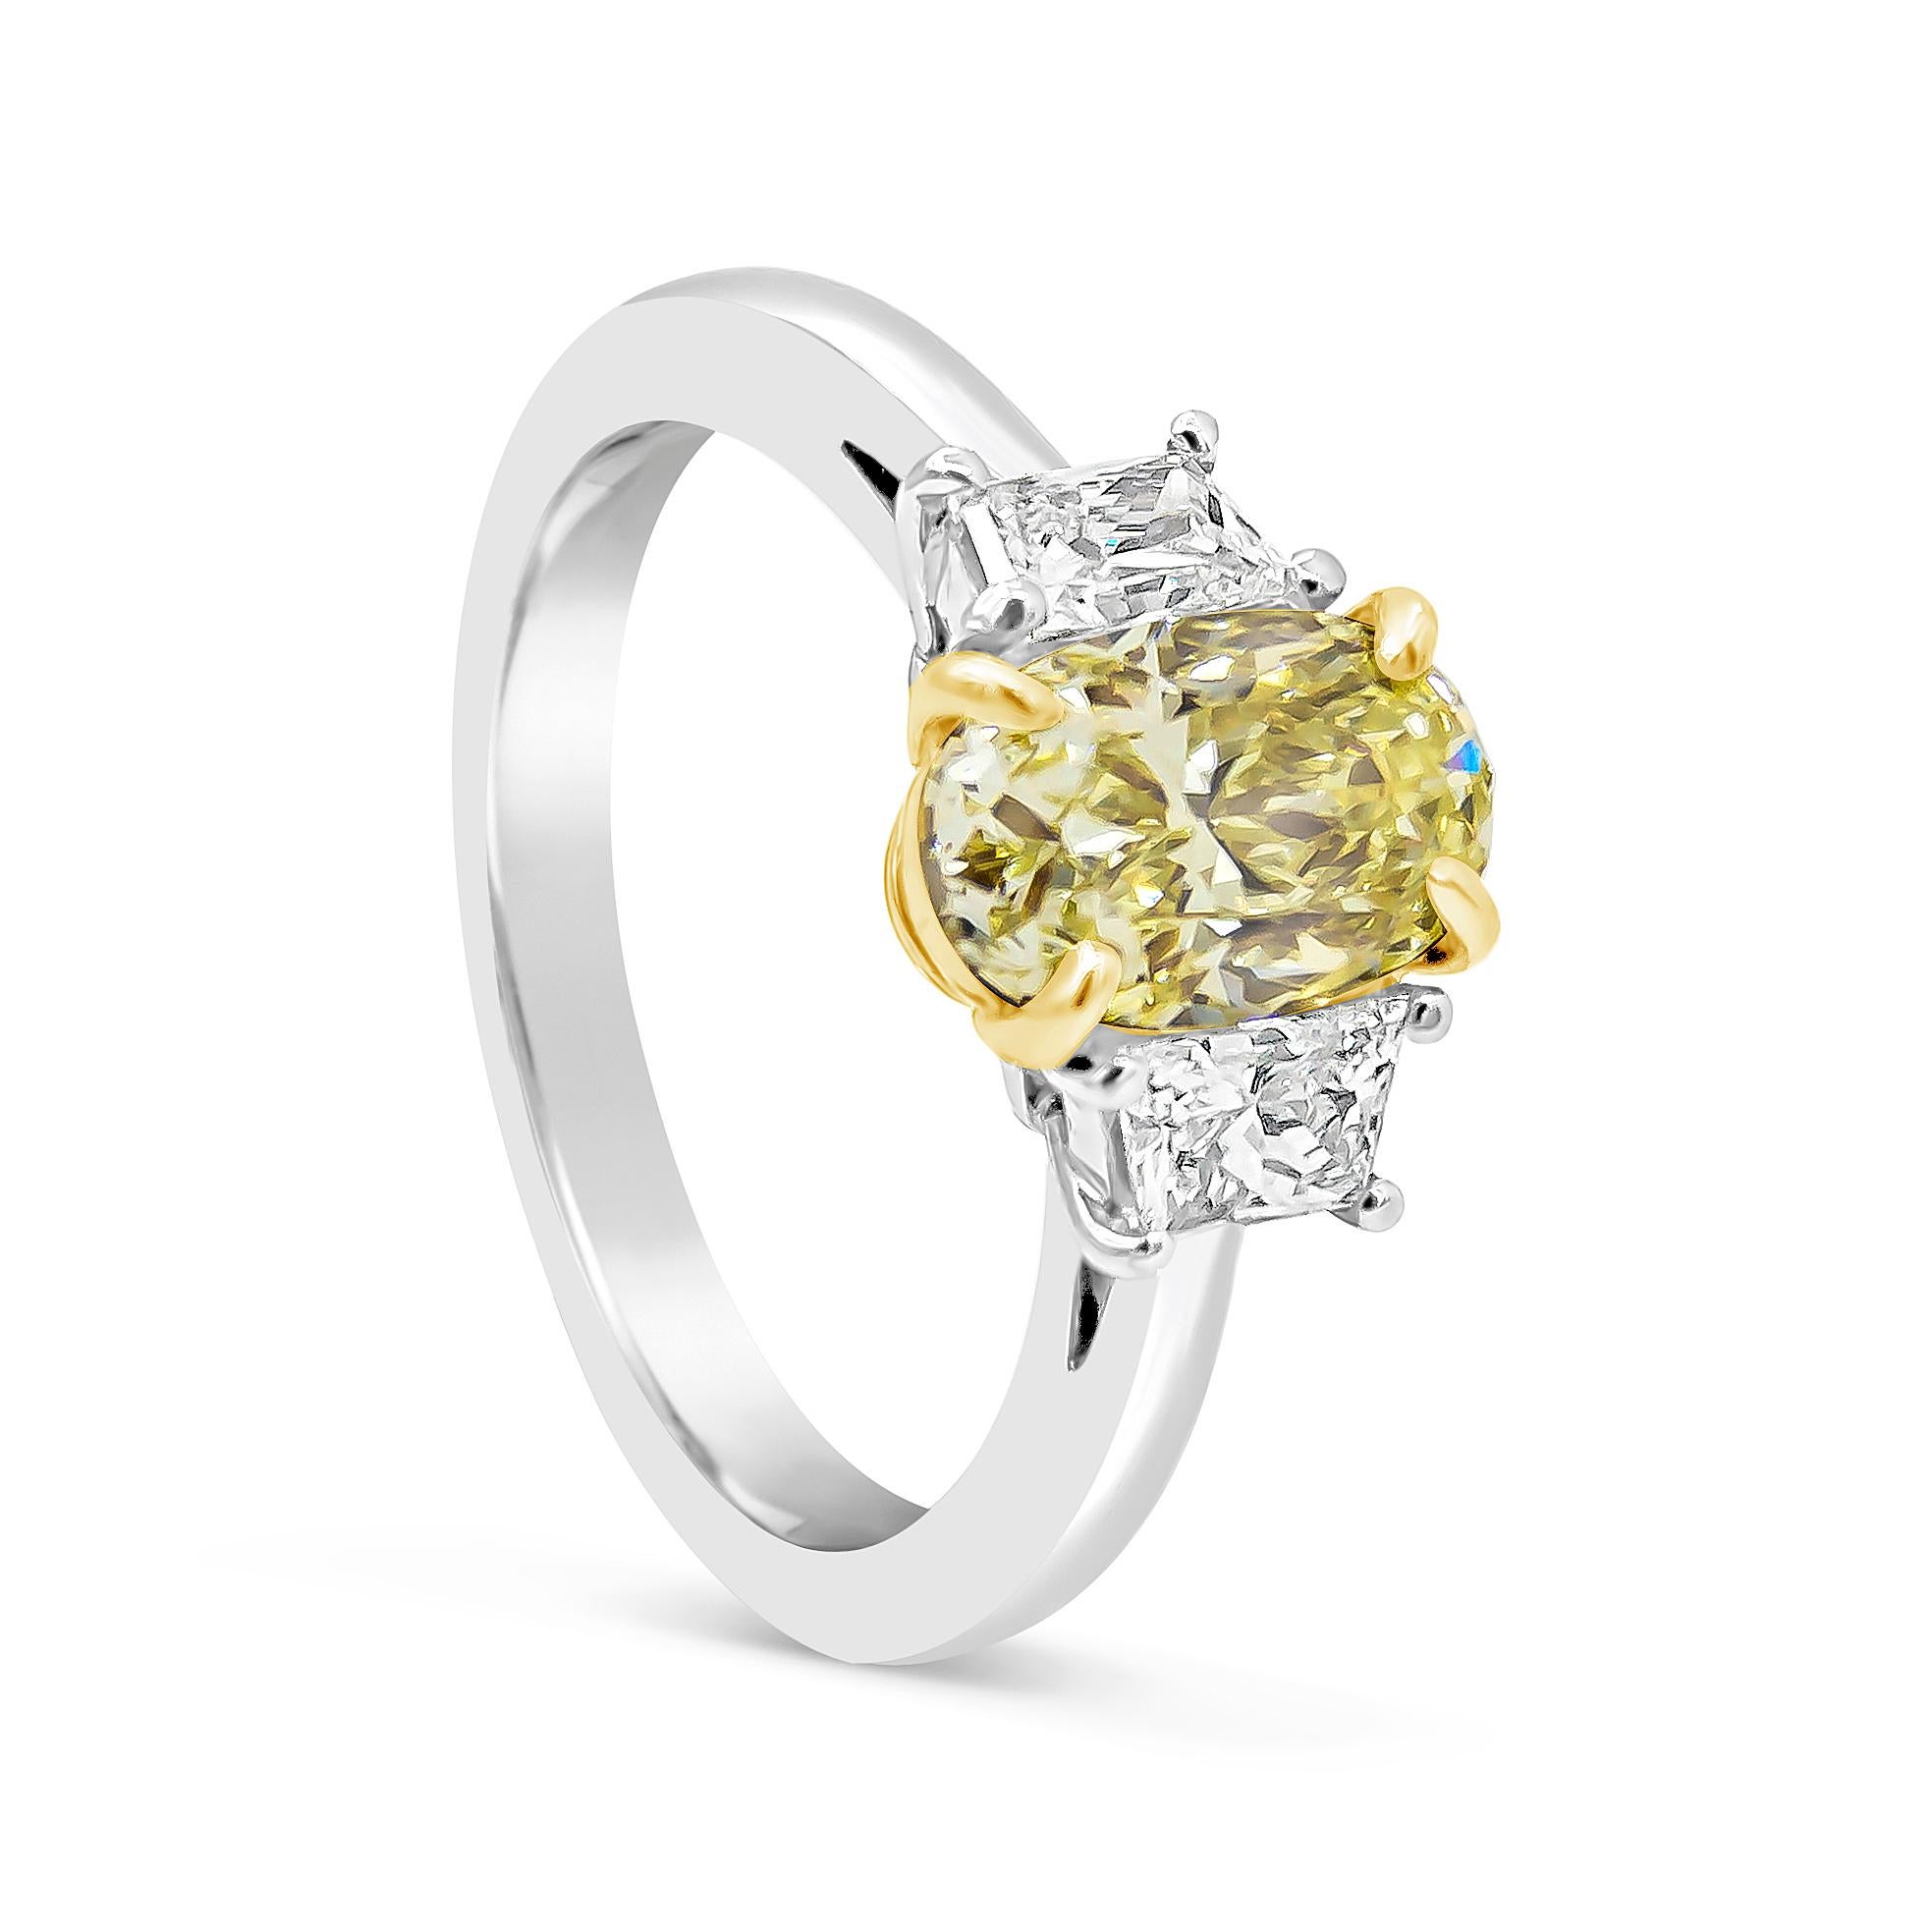 Showcasing a color-rich 1.57 carats oval cut yellow diamond certified by GIA as Fancy Yellow color and VS1 in clarity. Set in four prong setting made in 18K yellow gold. Flanked by two trapezoid diamonds weighing 0.50 carats total. Set in a polished